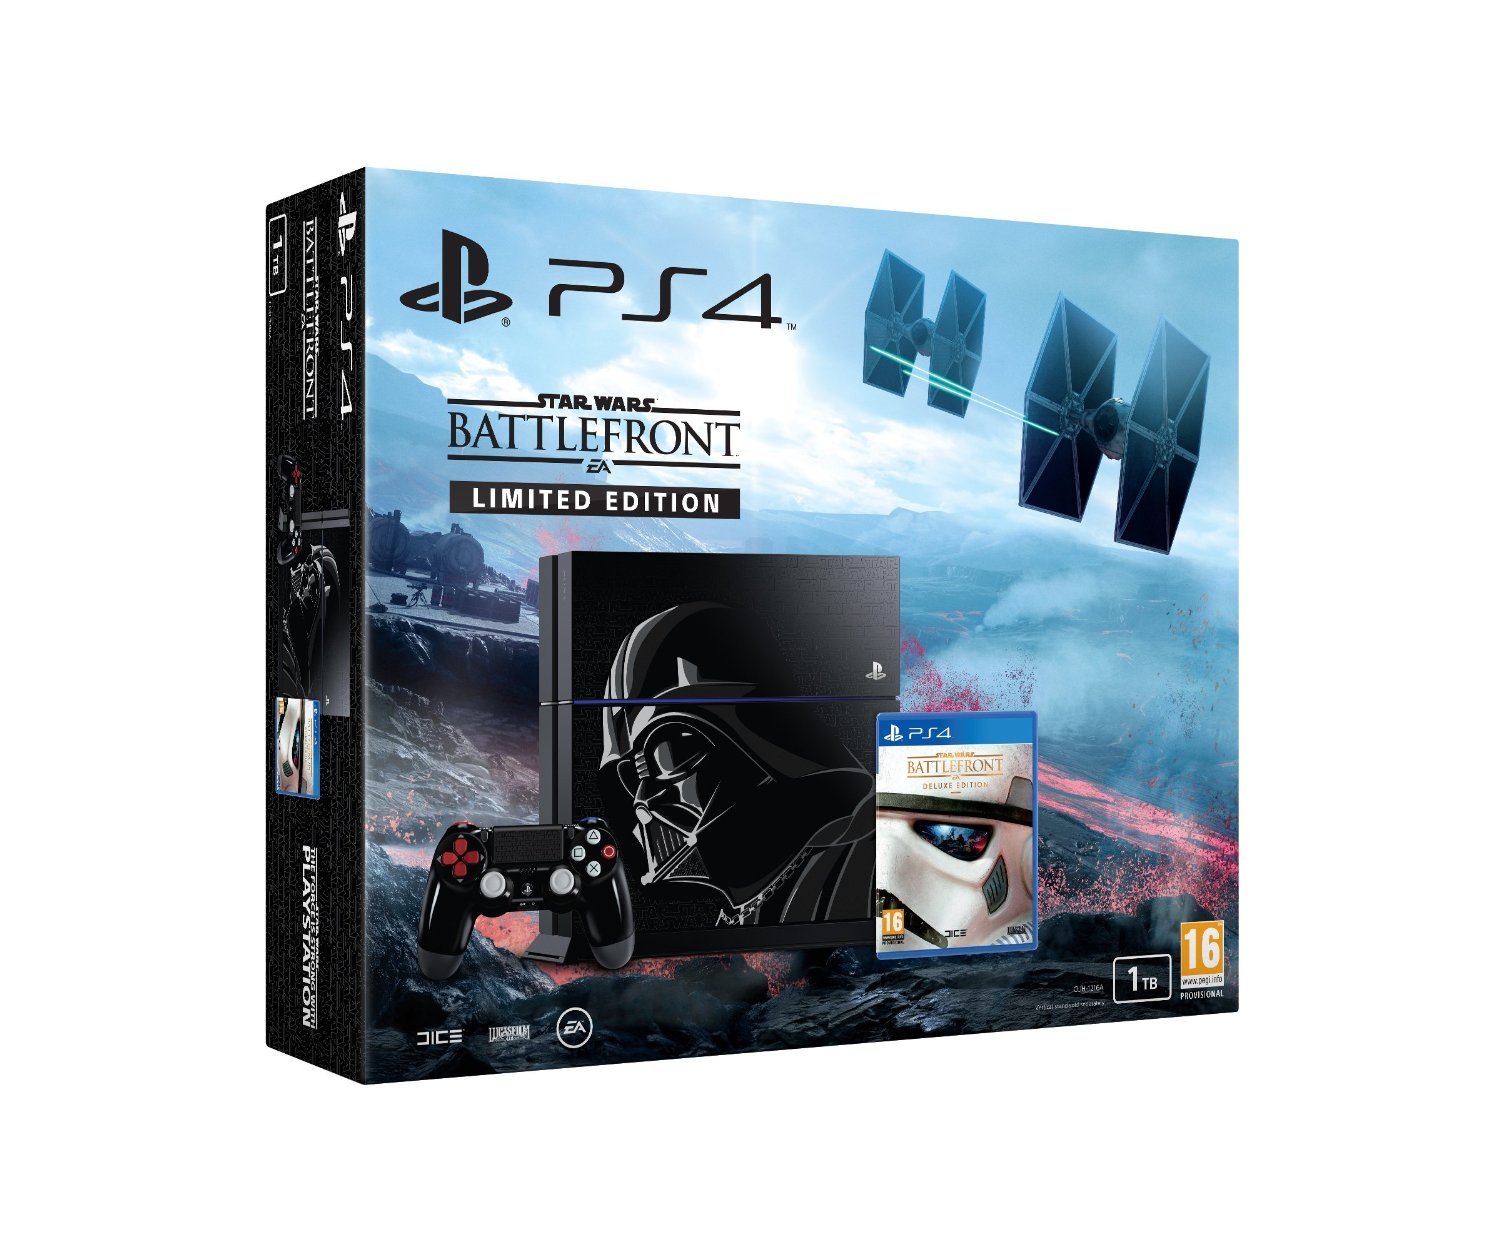  PlayStation 4 Pro 1TB Limited Edition Console - Star Wars  Battlefront II Bundle [Discontinued] : Video Games